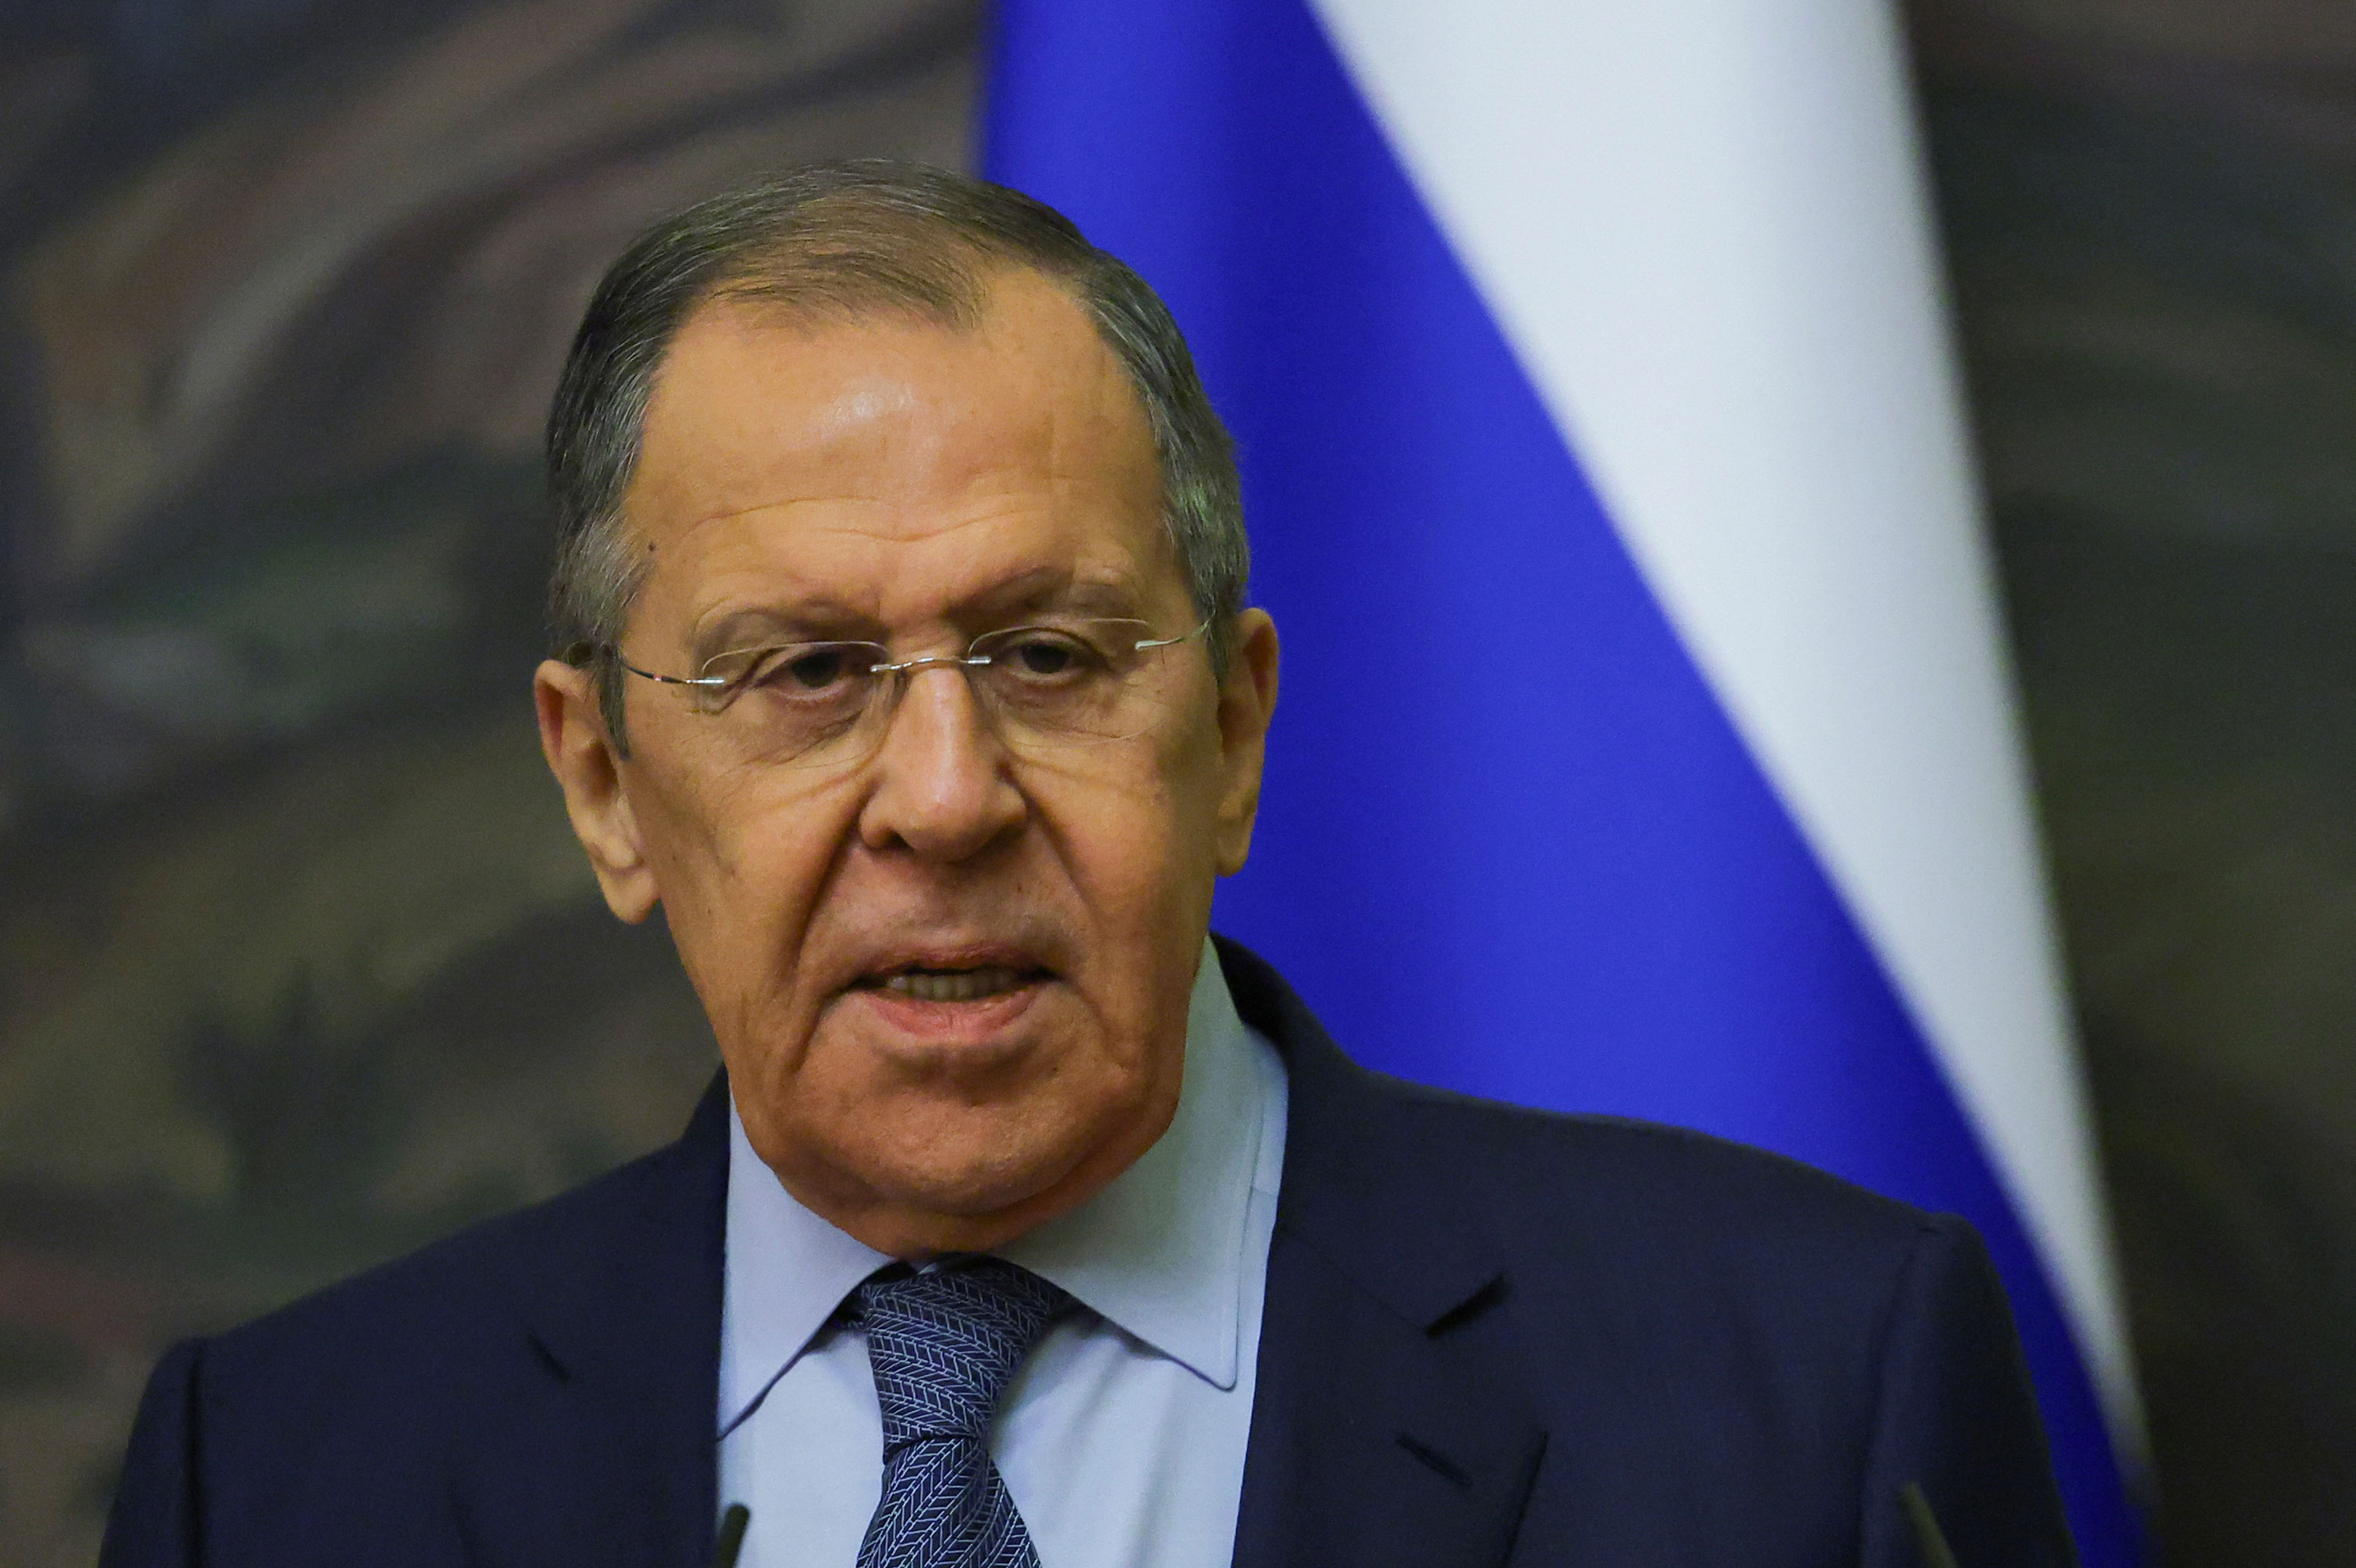 Russian Foreign Minister Sergey Lavrov speaks at a news conference in Moscow on December 23.